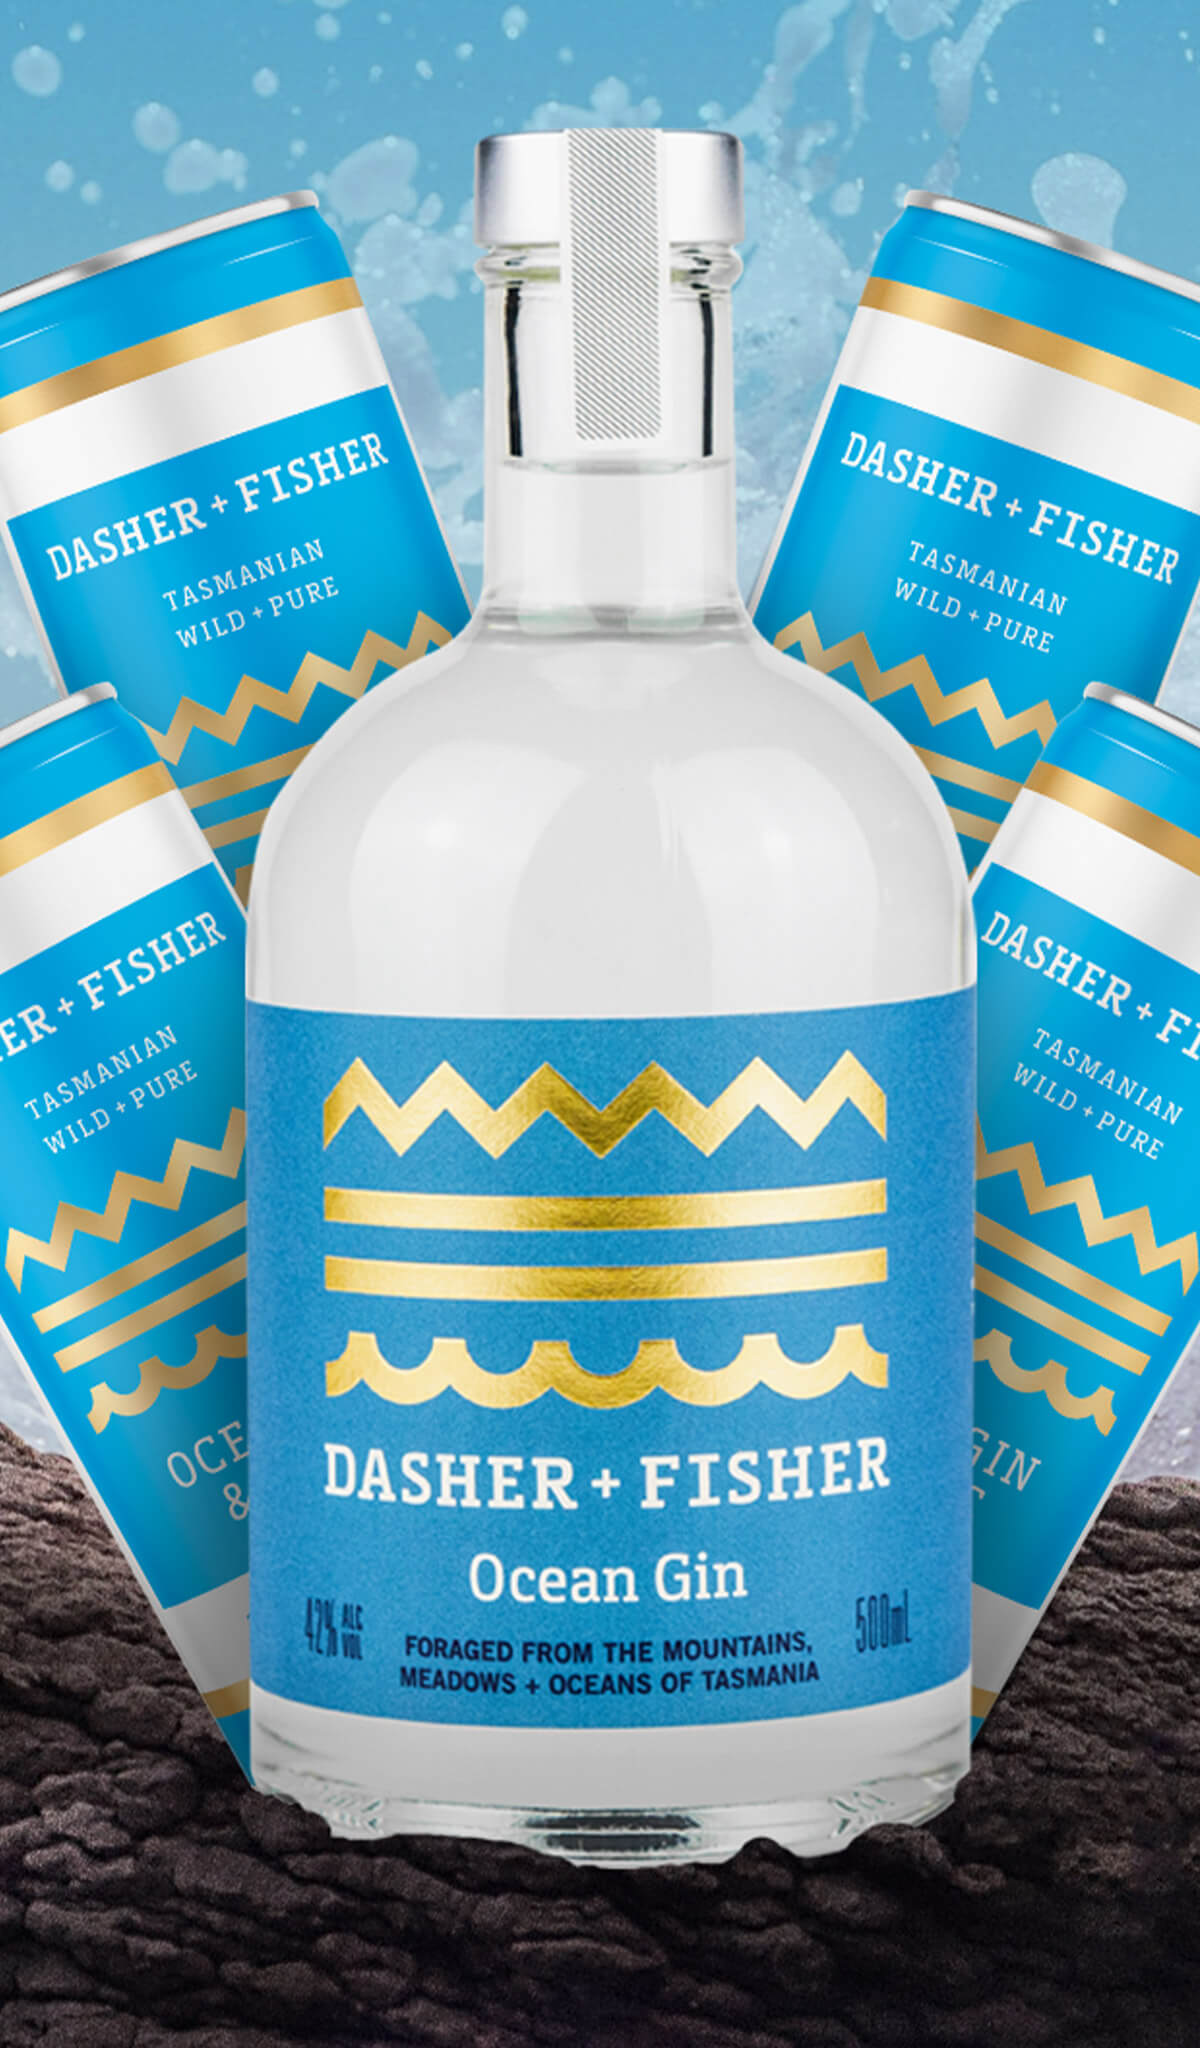 Dasher & Fisher Ocean Gin 500ml + FREE 4-Pack Gin & Tonic Cans